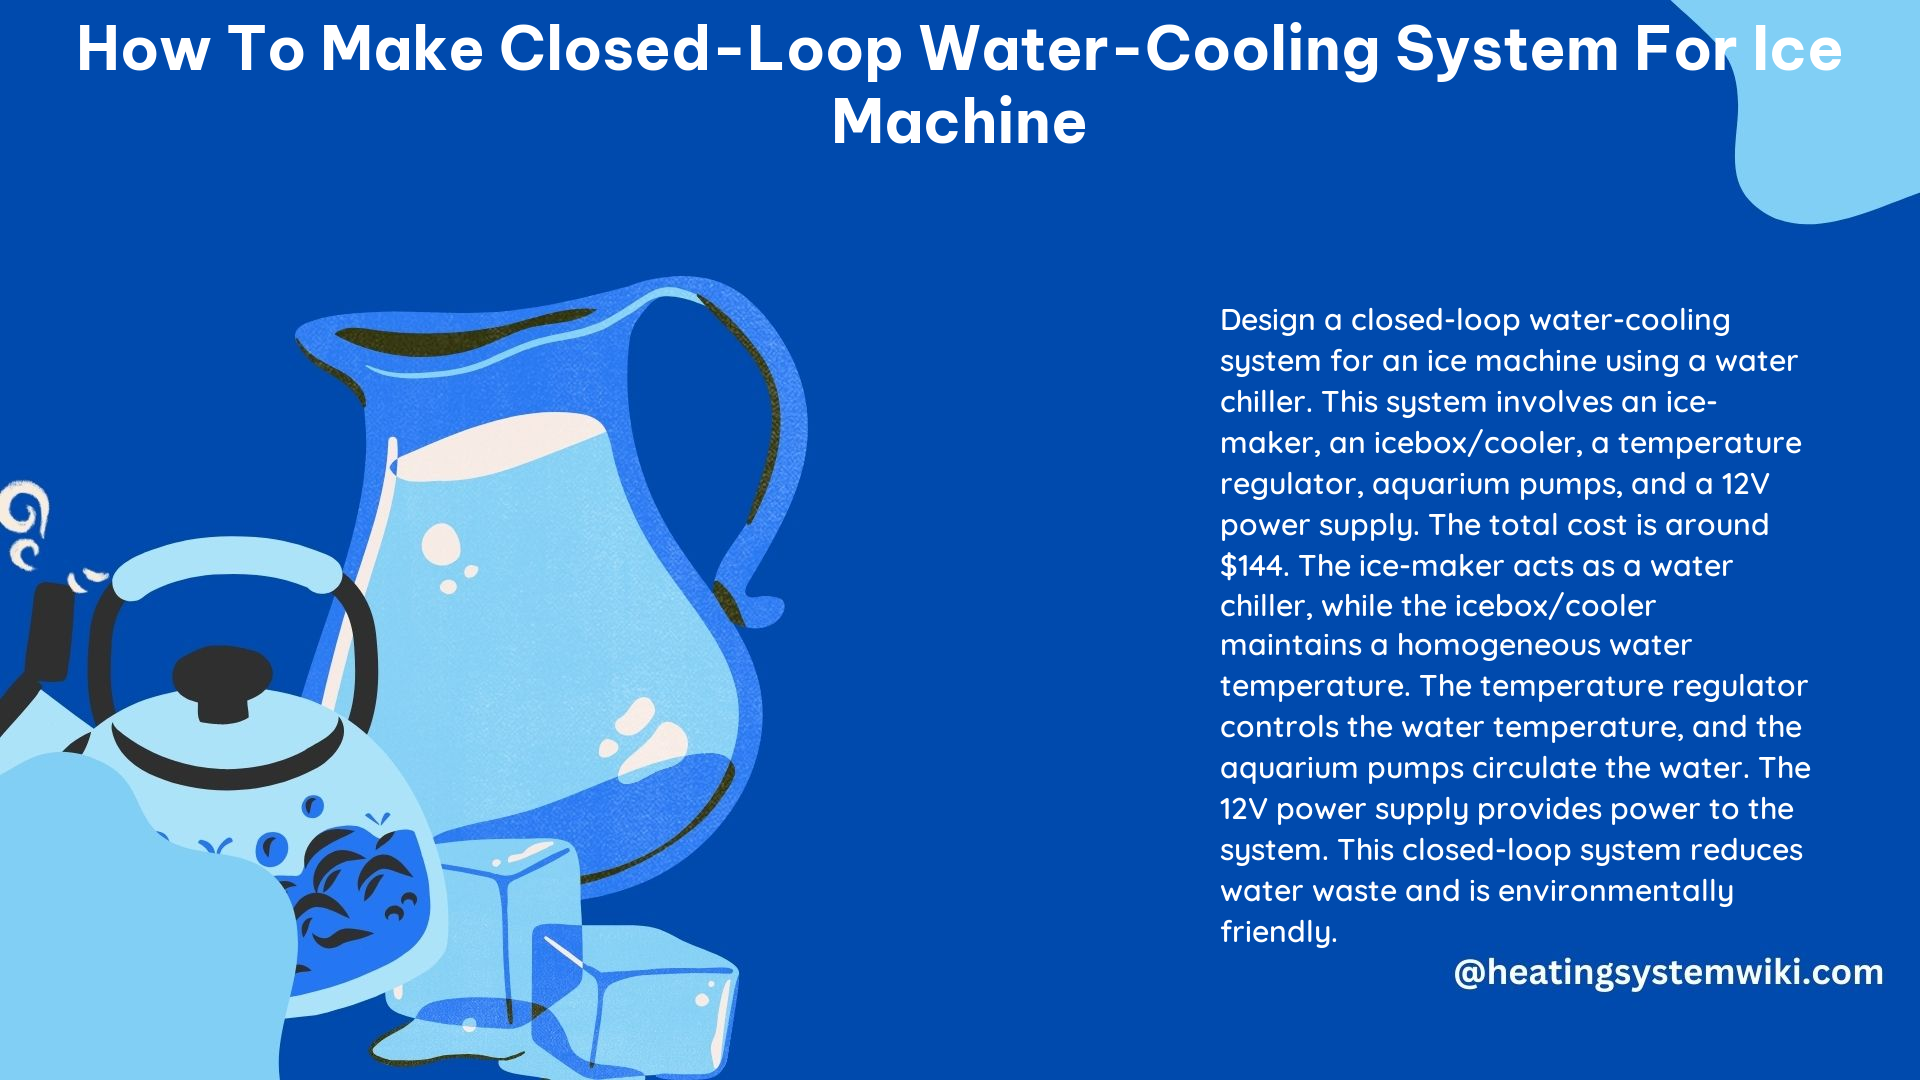 How to Make Closed-Loop Water-Cooling System for Ice Machine